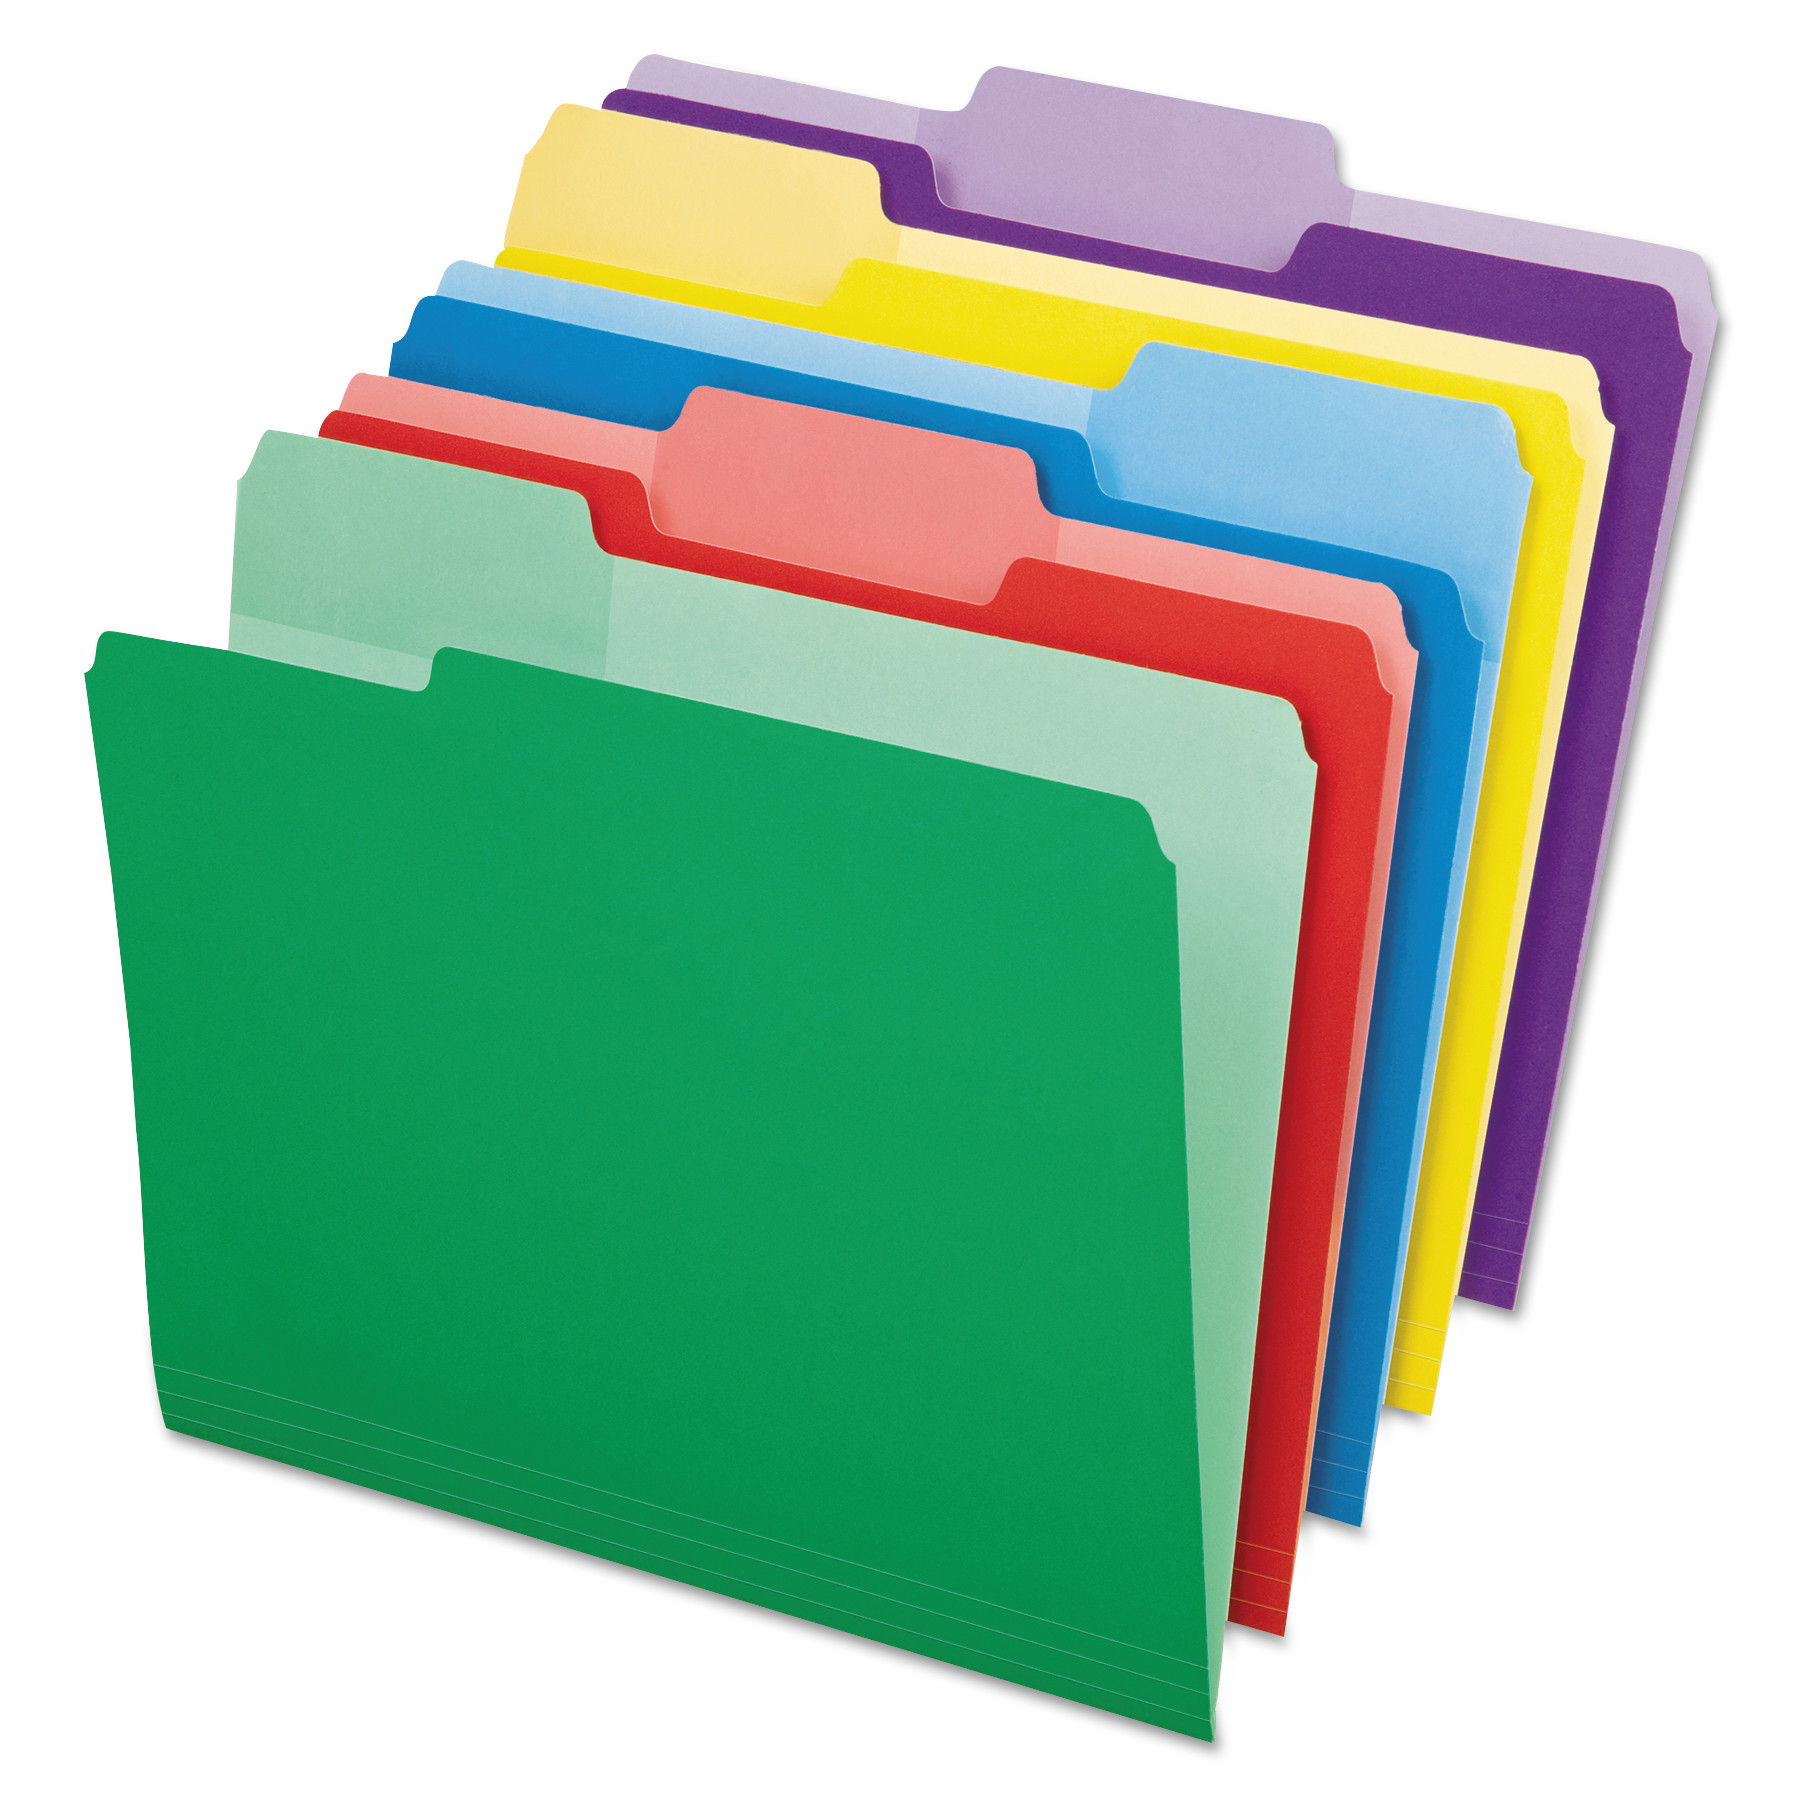 Assorted Colors 1 Pack 1/3-Cut Tabs Bright Green, Yellow, Red, Blue 4-Color Pendaflex Two-Tone Color File Folders Letter Size Assorted 36 Pack 